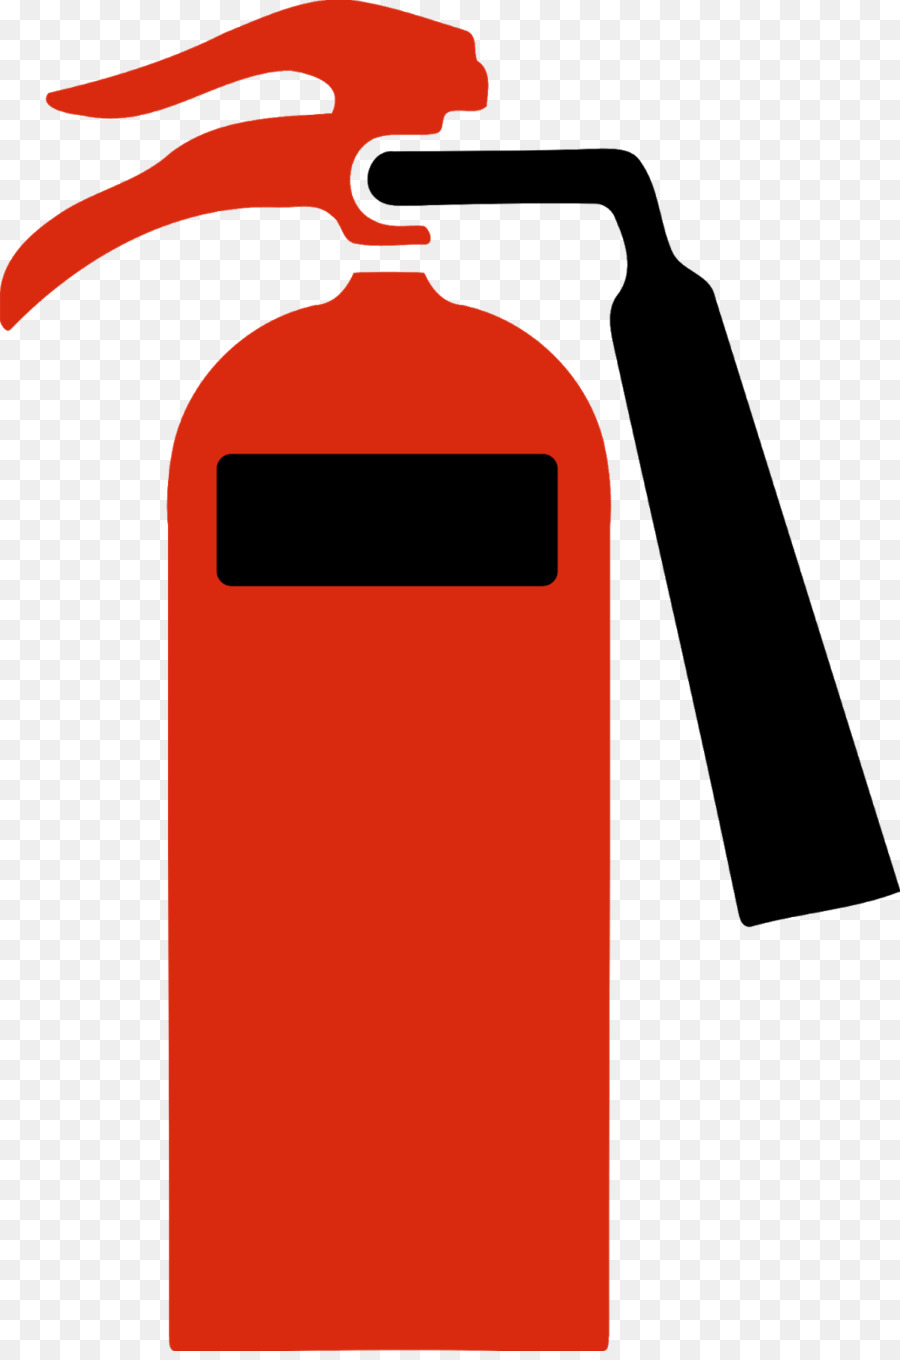 Fire Cartoon Png Download 1066 1600 Free Transparent Fire Extinguishers Png Download Cleanpng Kisspng Soap scalable graphics laundry detergent icon, a blue fire extinguisher png. fire cartoon png download 1066 1600